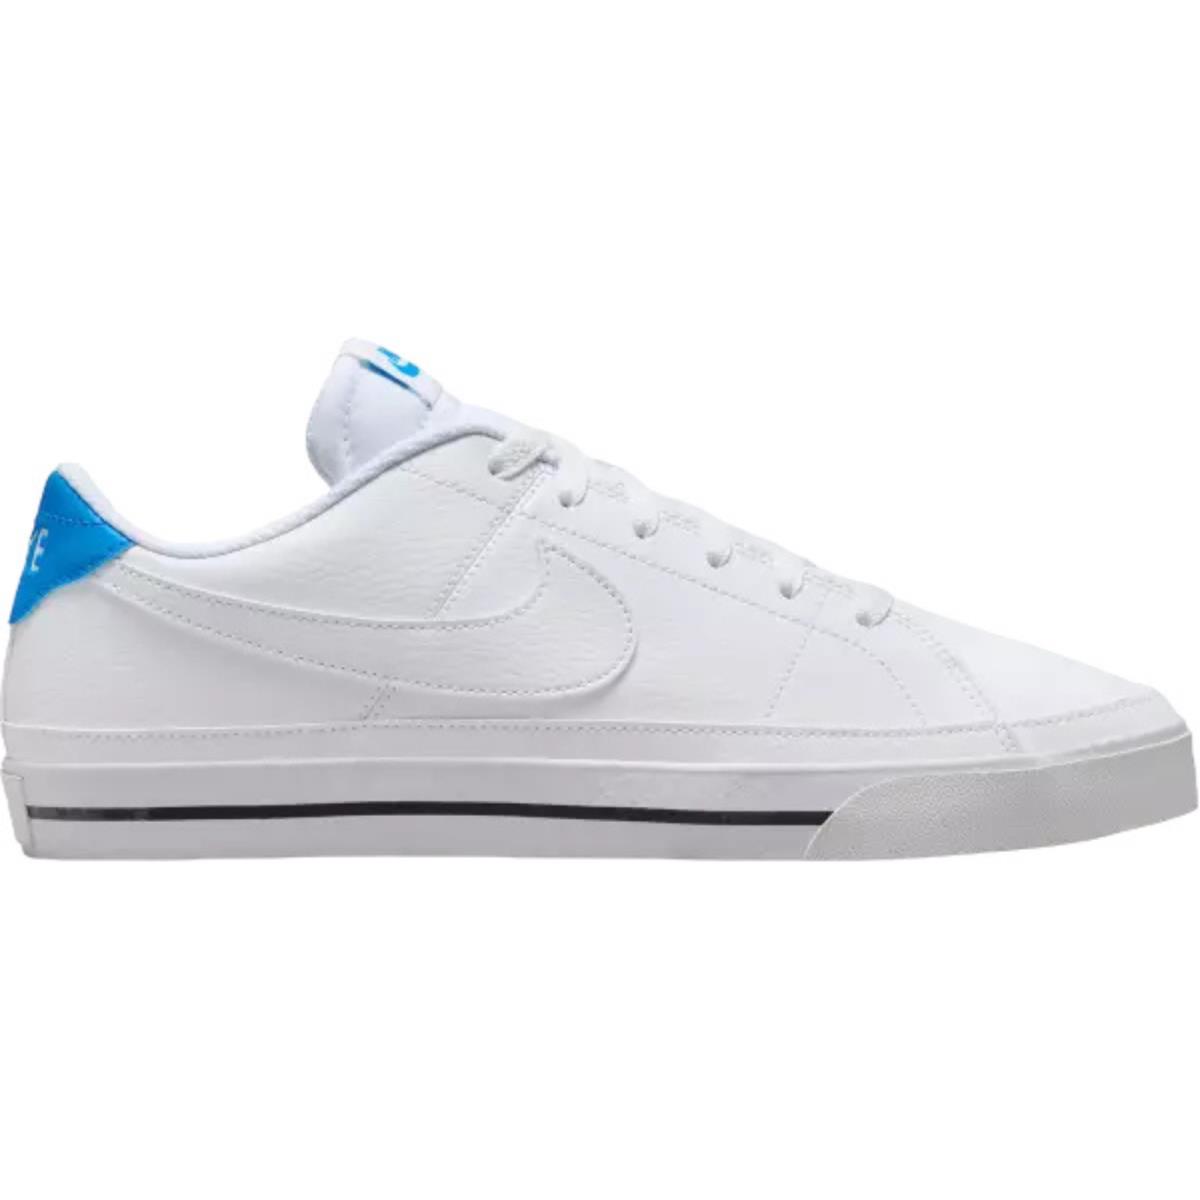 Nike Court Legacy Men`s Casual Shoes All Colors US Sizes 7-14 White/Black/Photo Blue